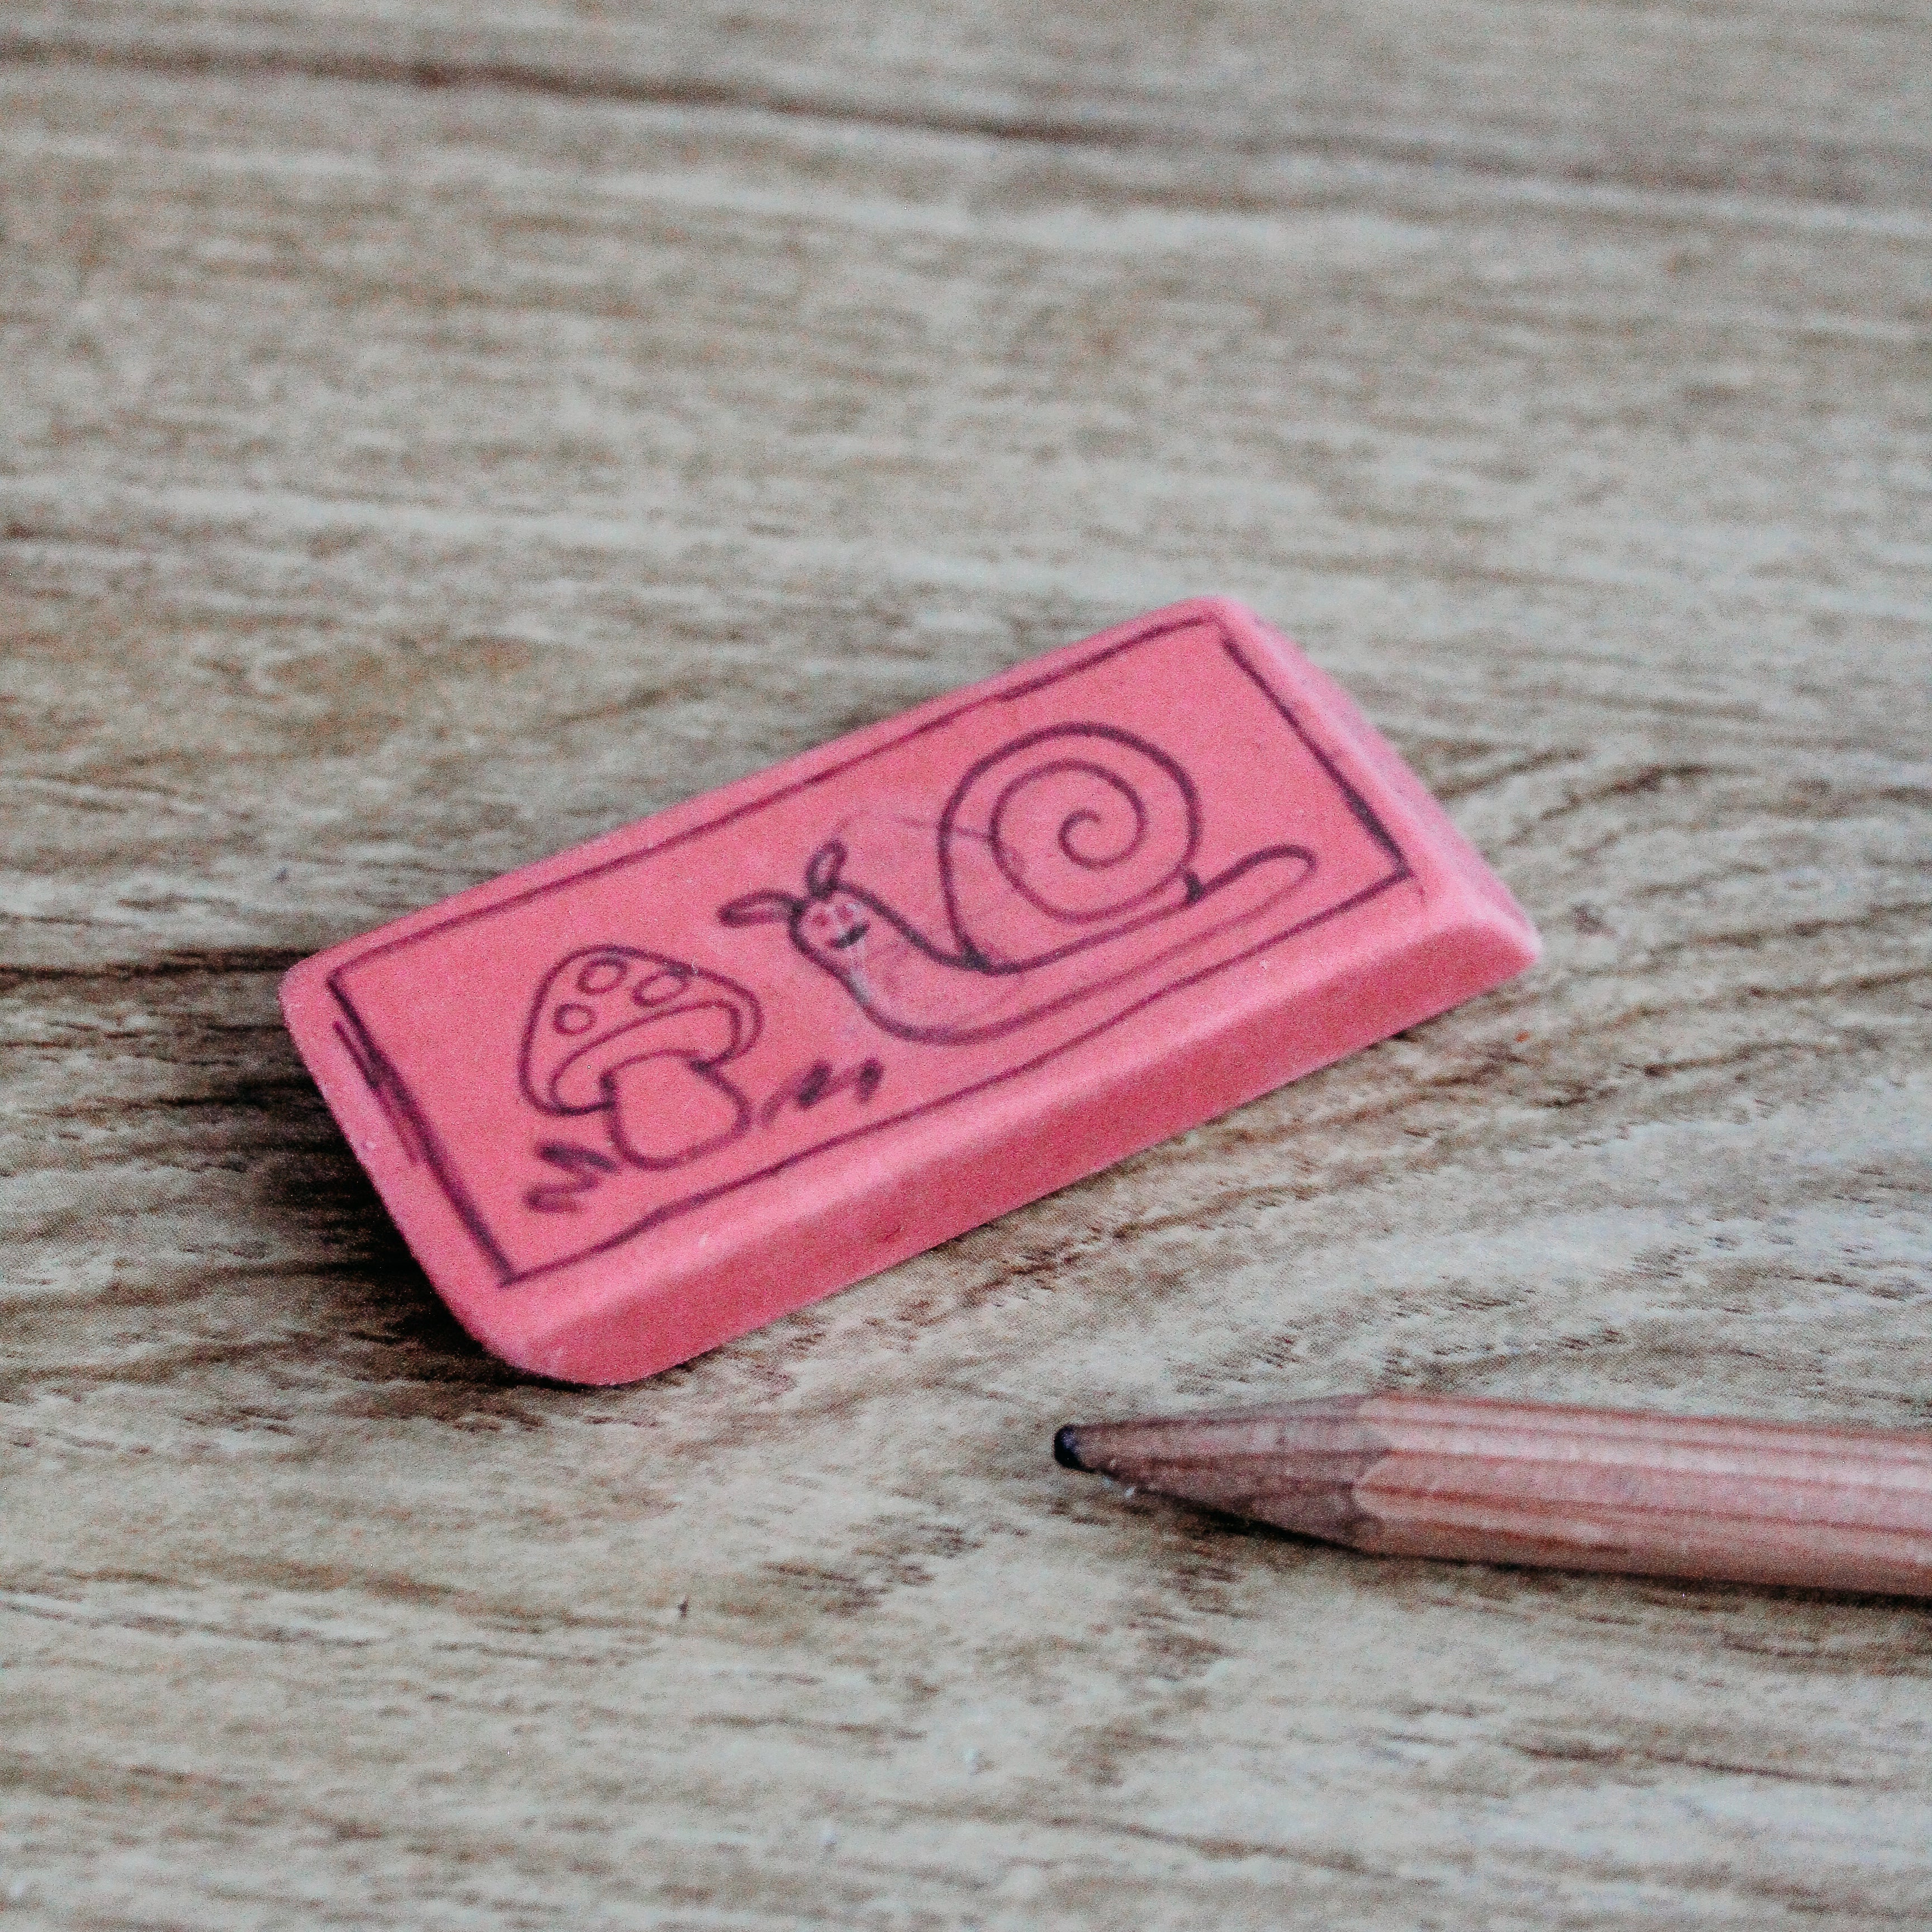 An eraser with a drawing on it sits ext to a pencil.